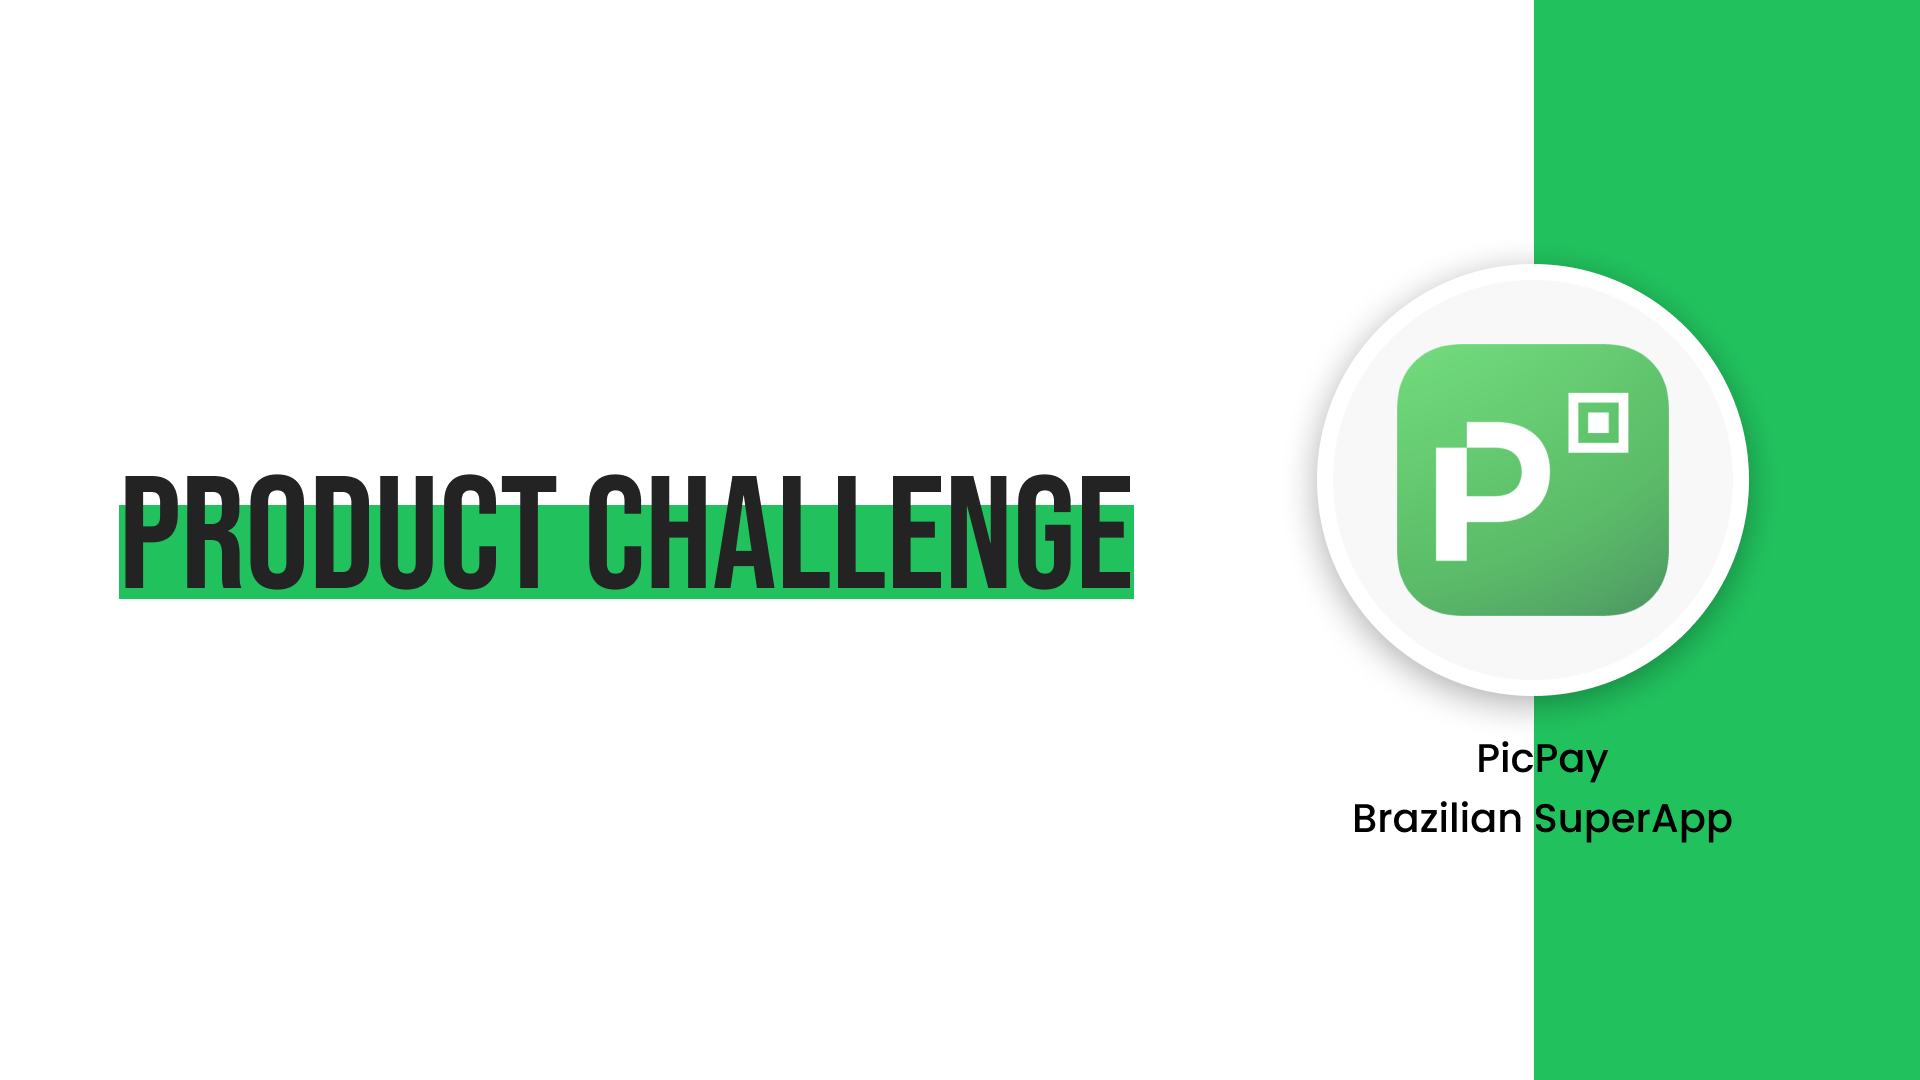 PicPay Product Challenge